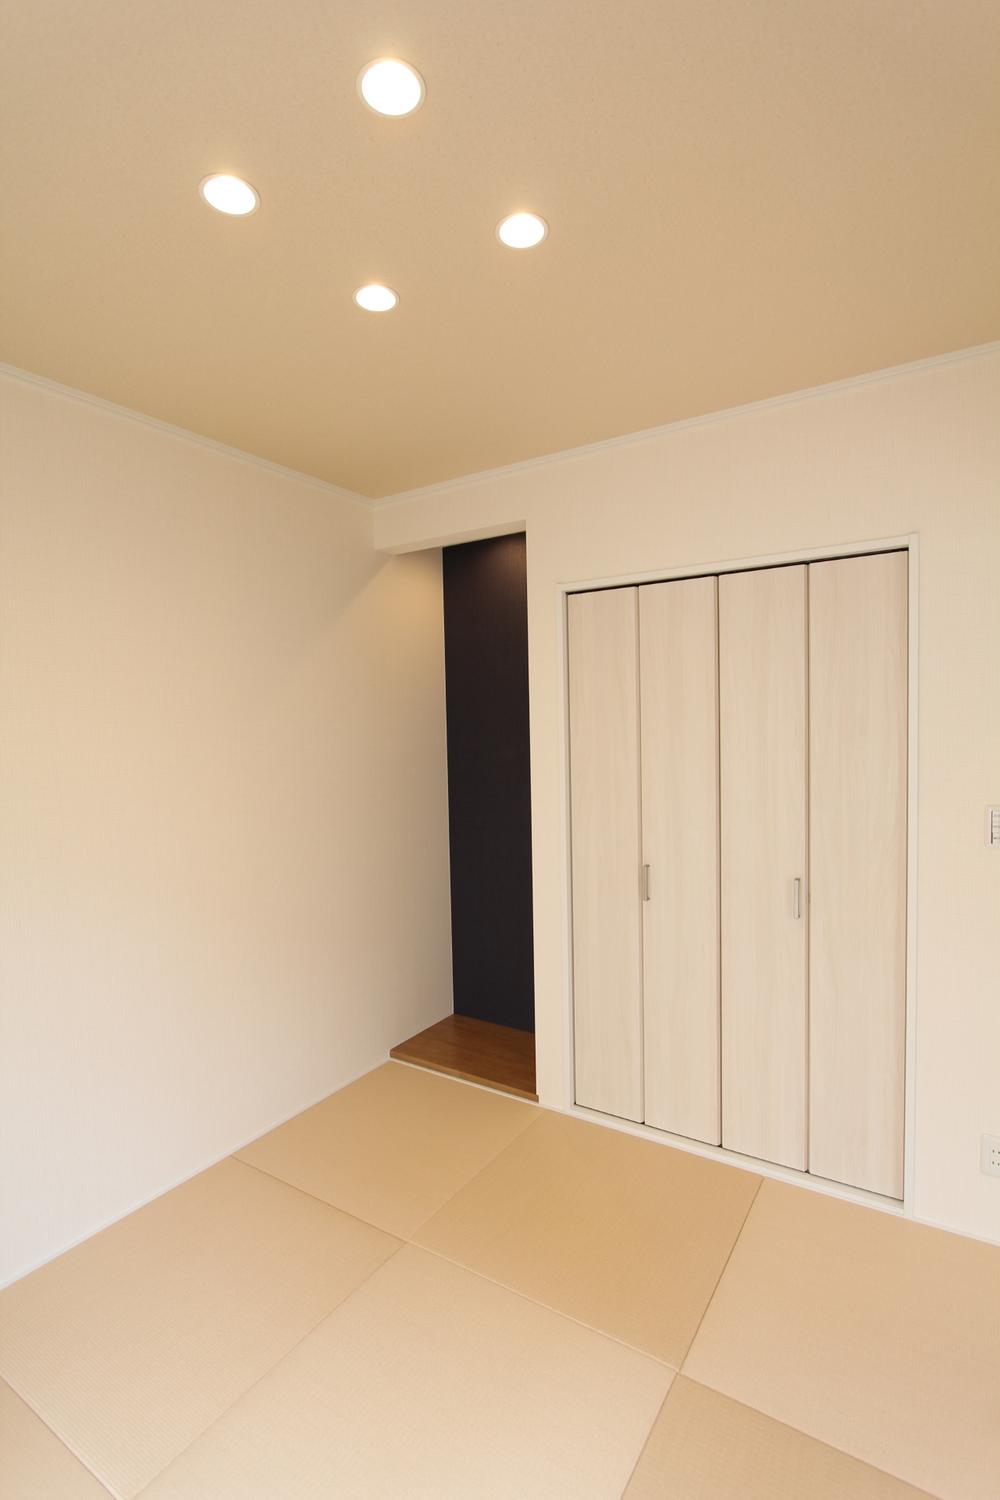 Non-living room. Japanese-style room Reference photograph